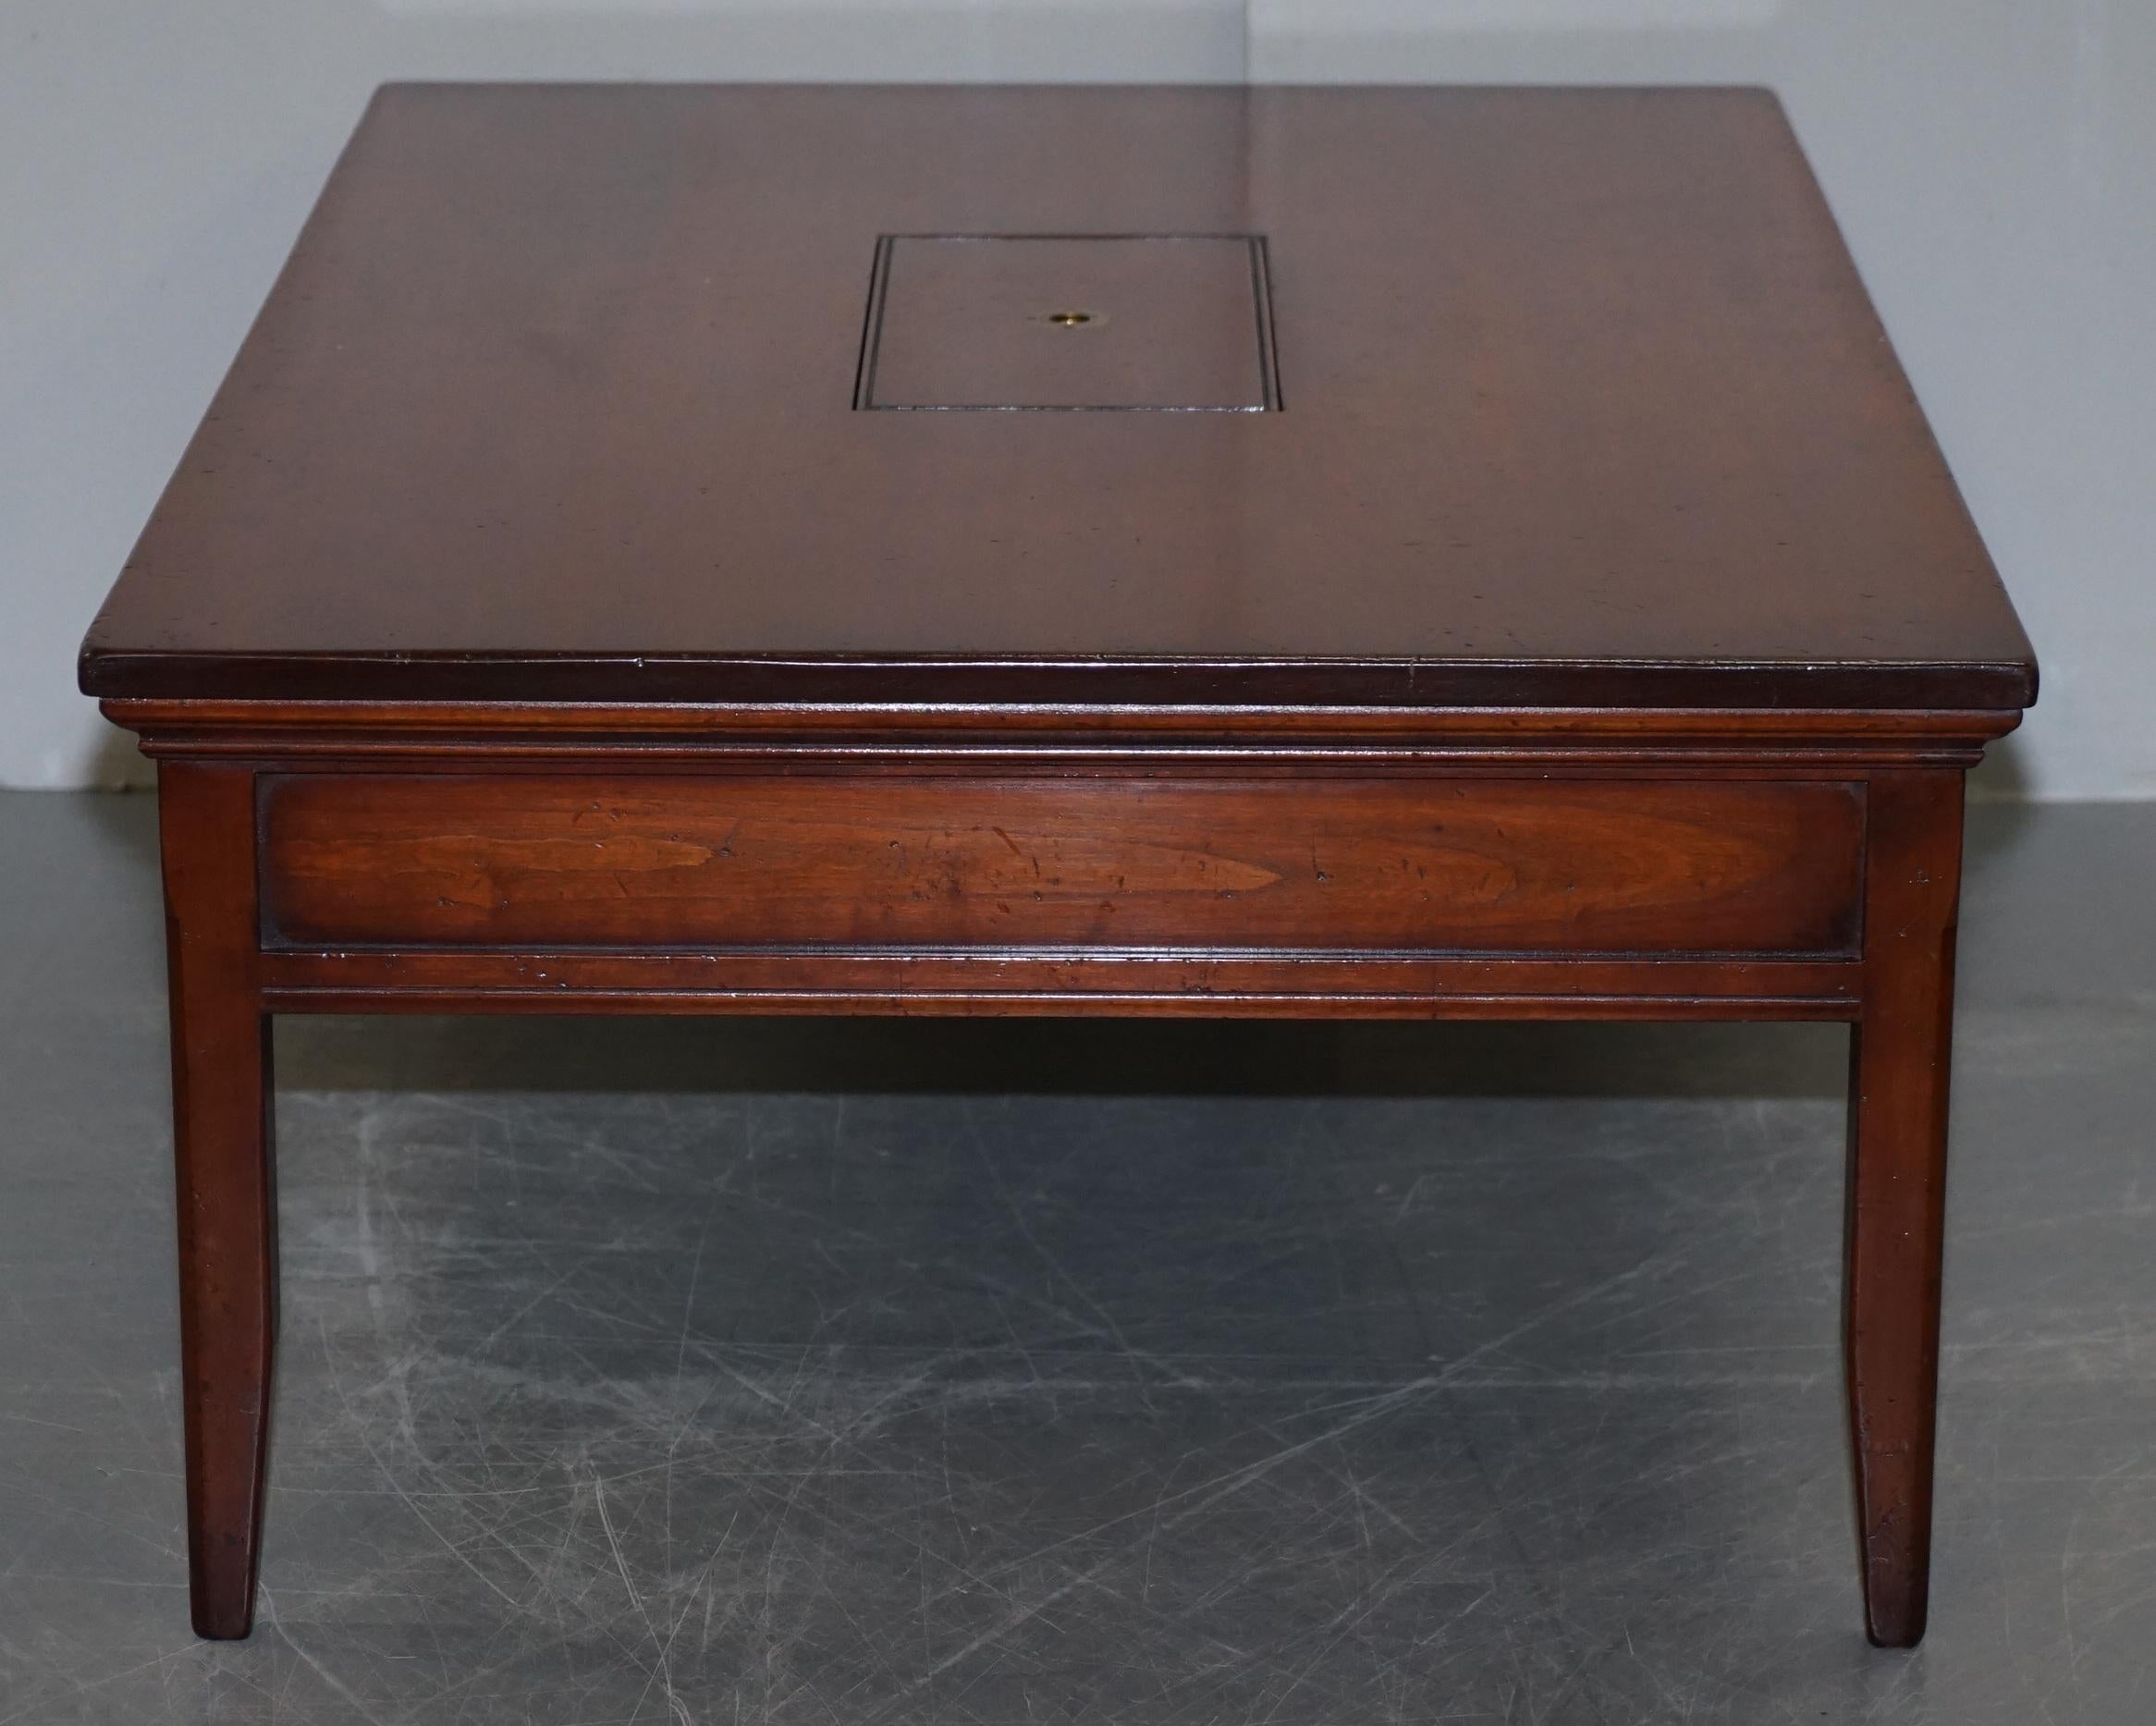 1 of 2 Hardwood Harrods Kennedy Military Campaign Coffee Table Internal Storage 7